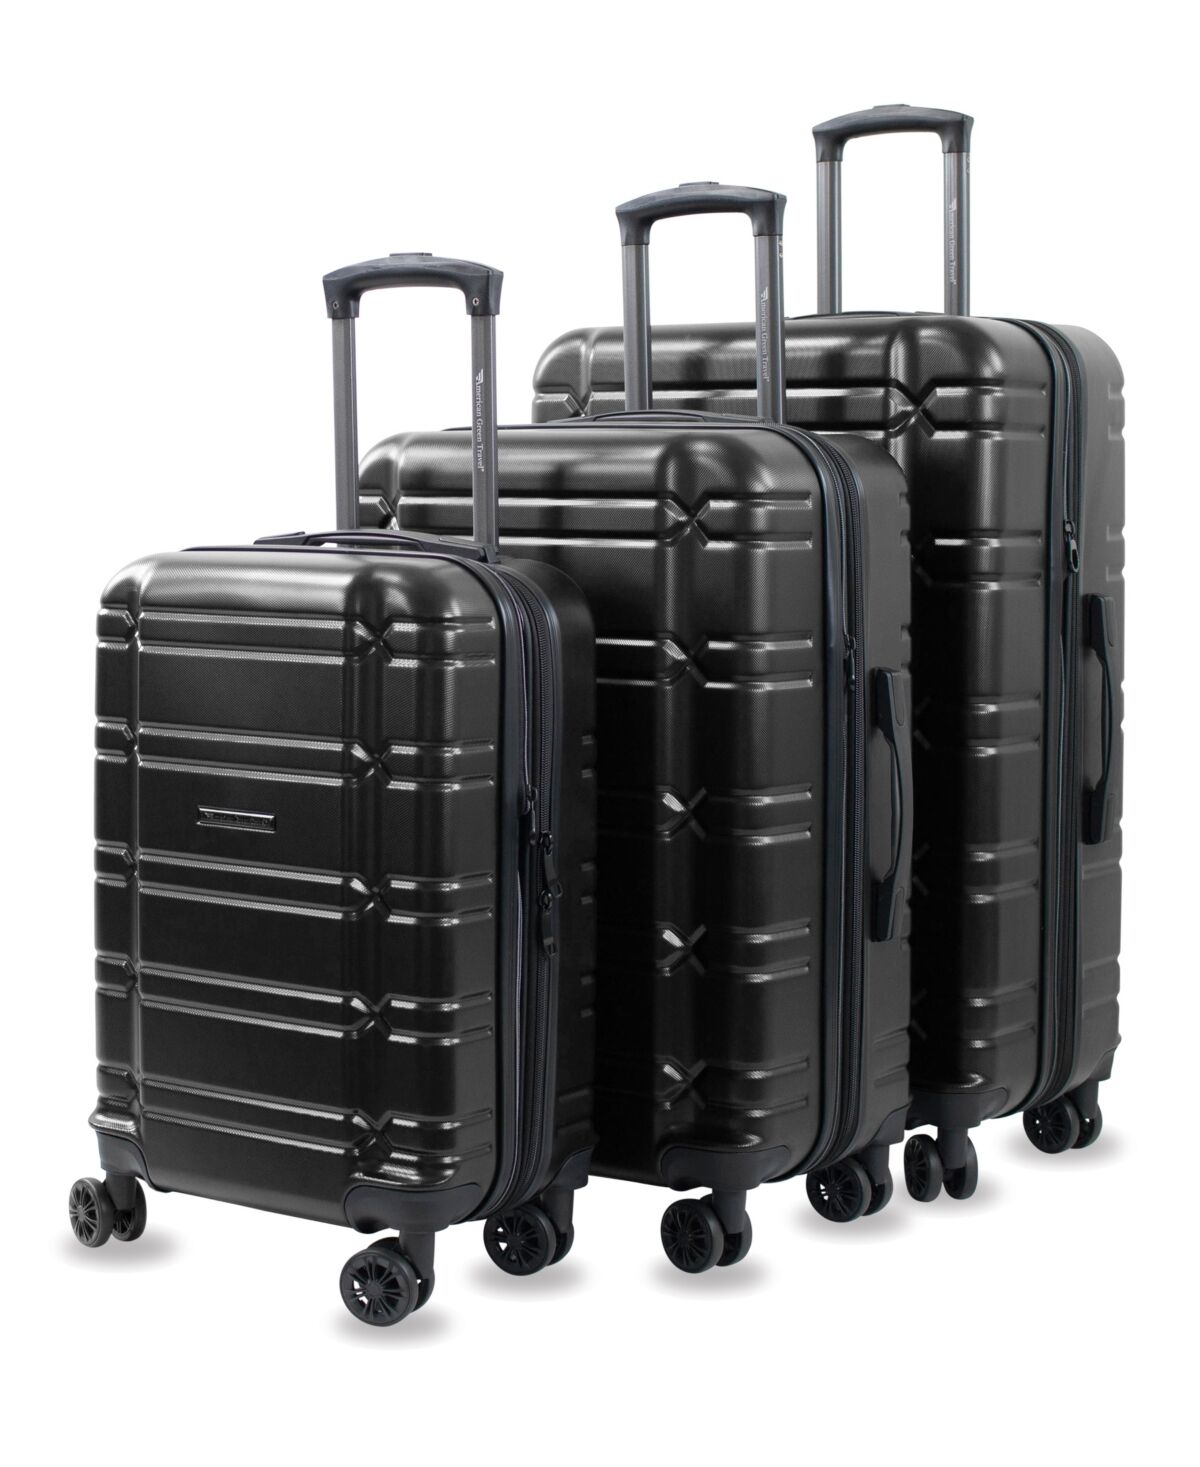 American Green Travel Allegro Hard side Spinner Suitcase Luggage Set, 3 Pieces - Black